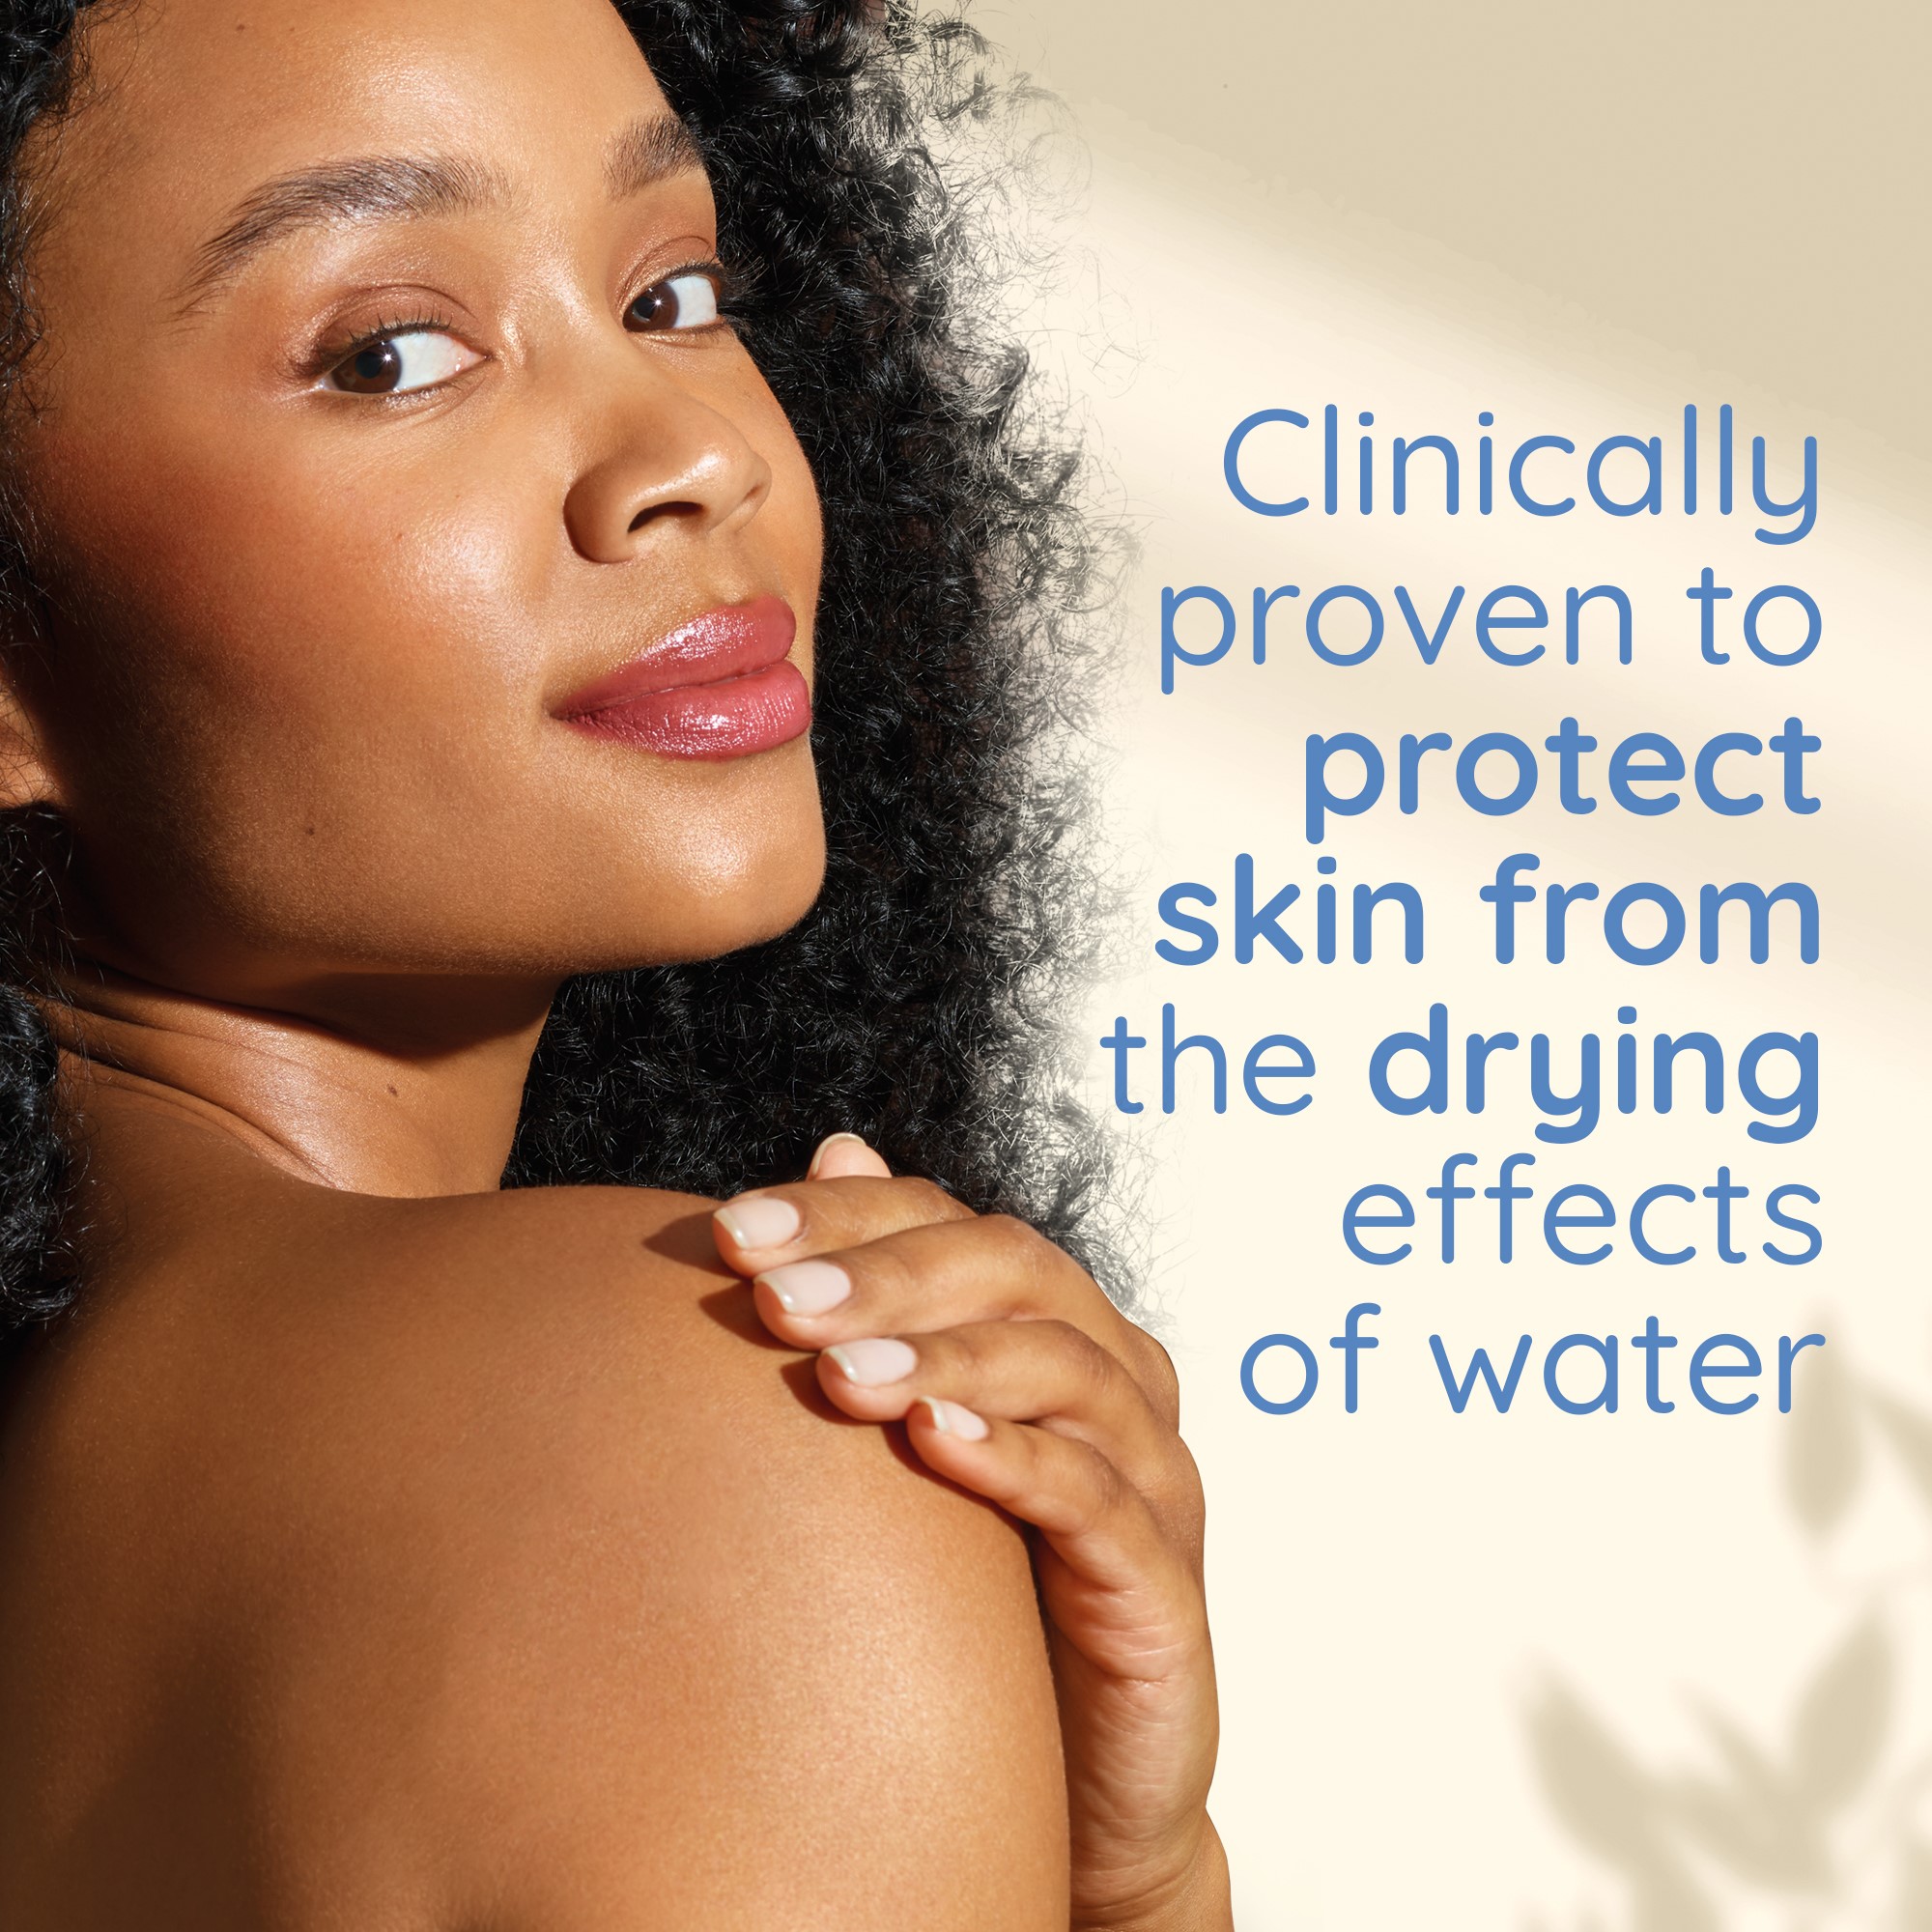 Clinically proven to protect skin from the drying effects of water